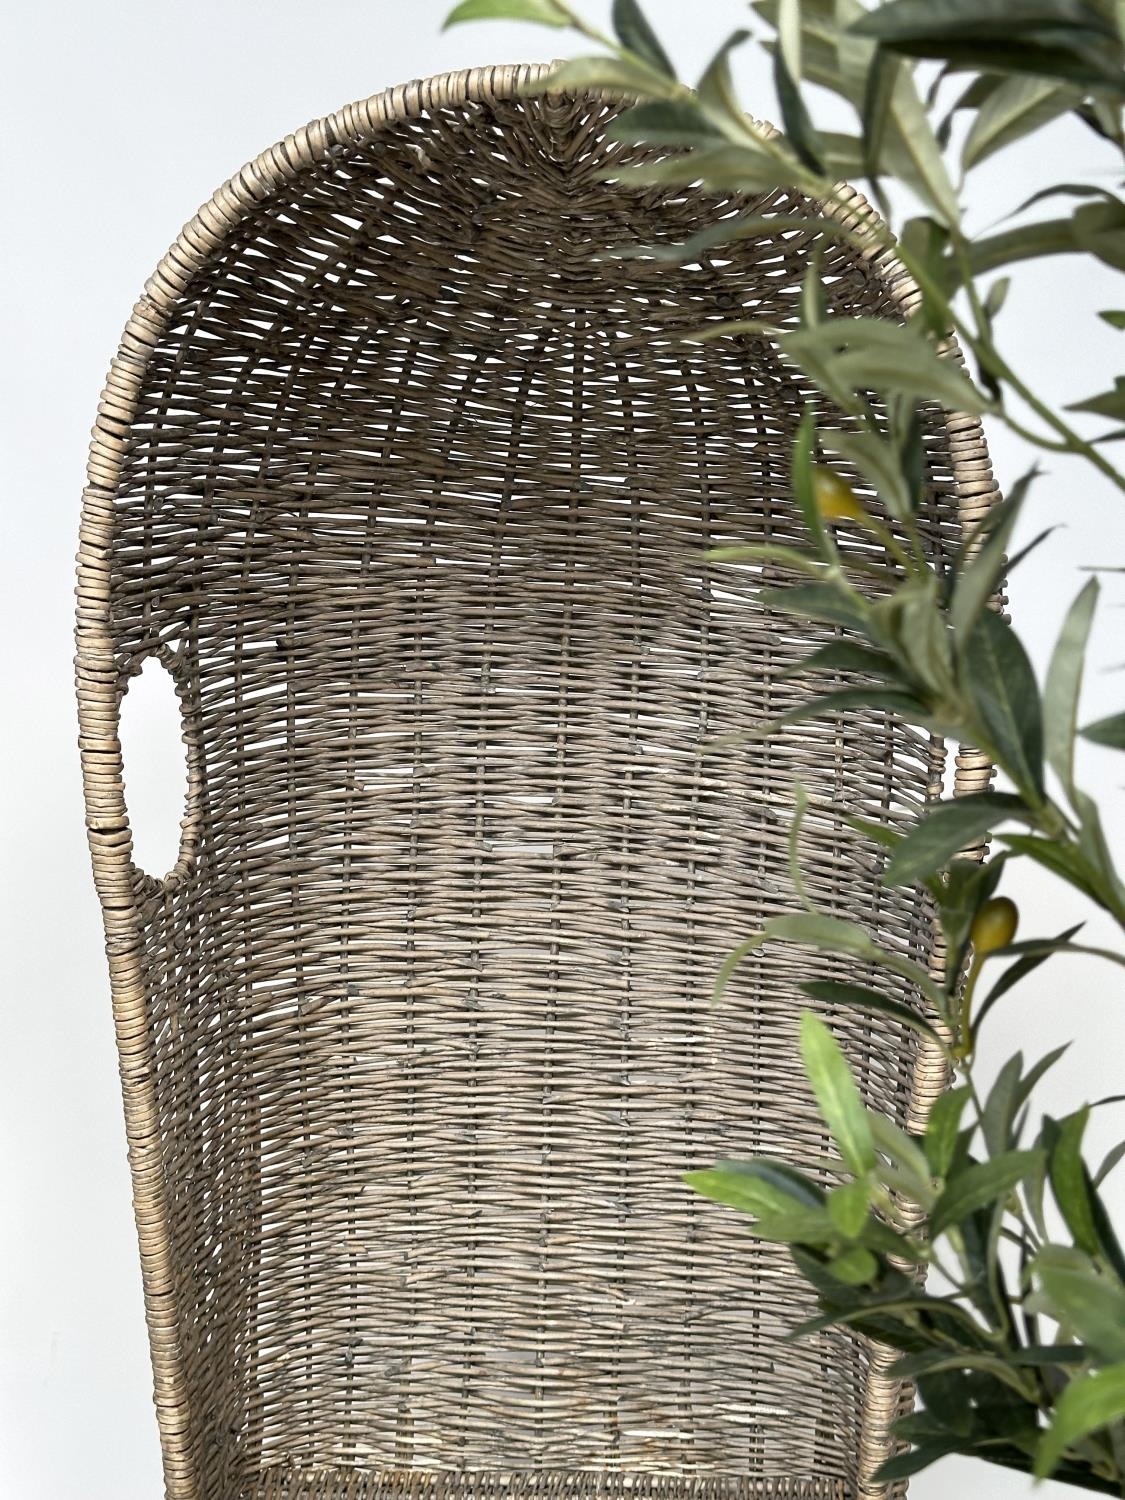 ORANGERY CHAIR, porters style rattan framed and wicker woven panelled with viewing openings, 179cm H - Image 2 of 13